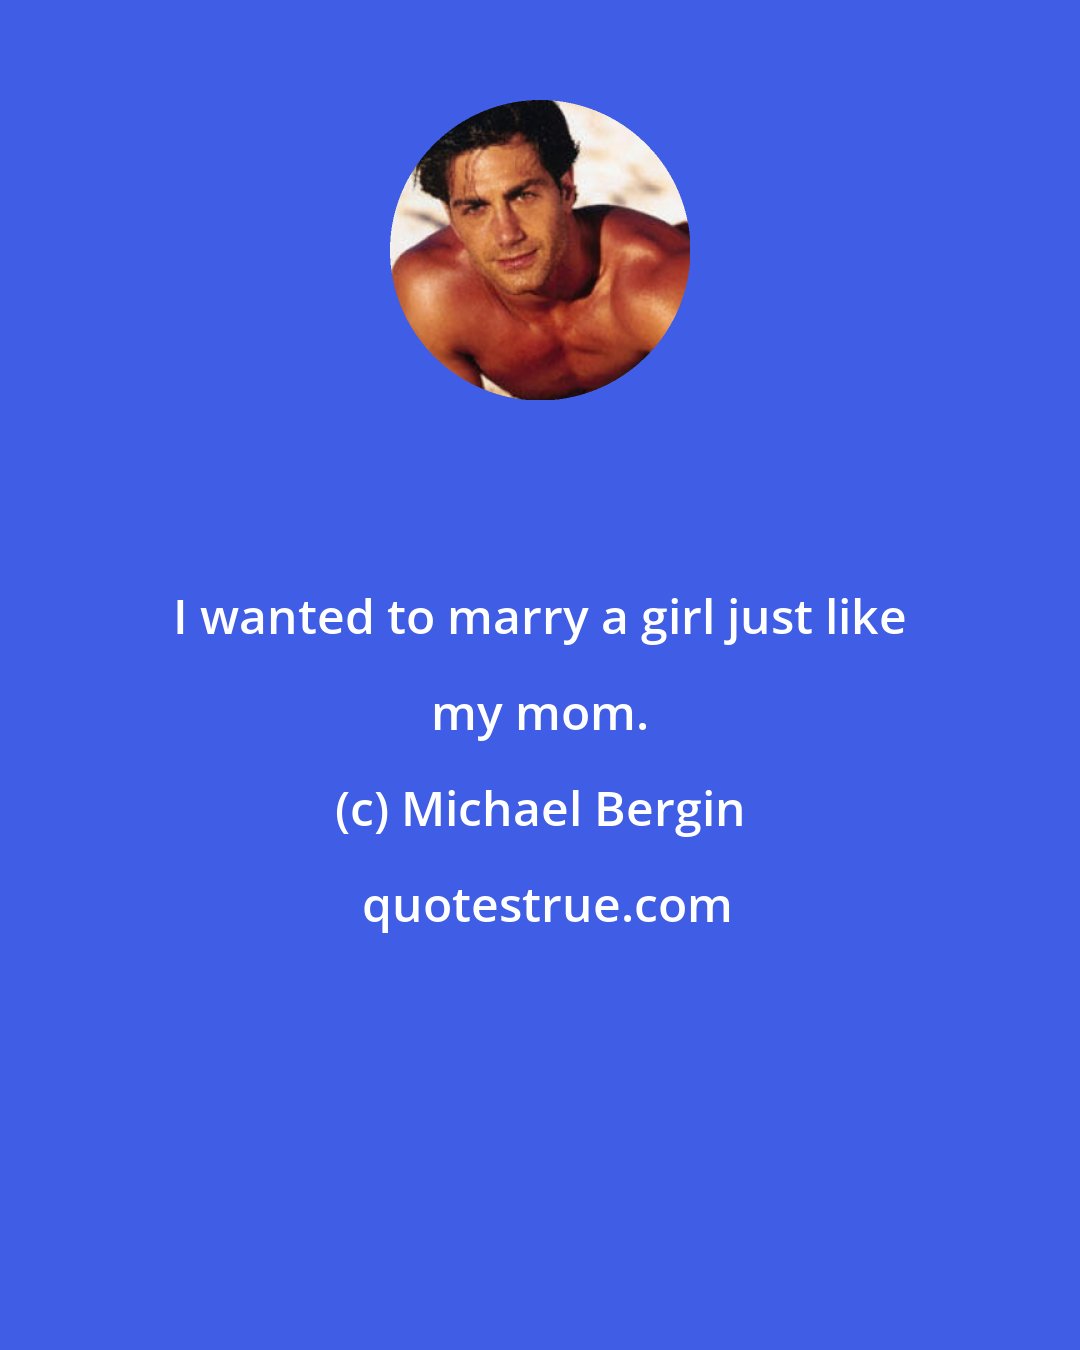 Michael Bergin: I wanted to marry a girl just like my mom.